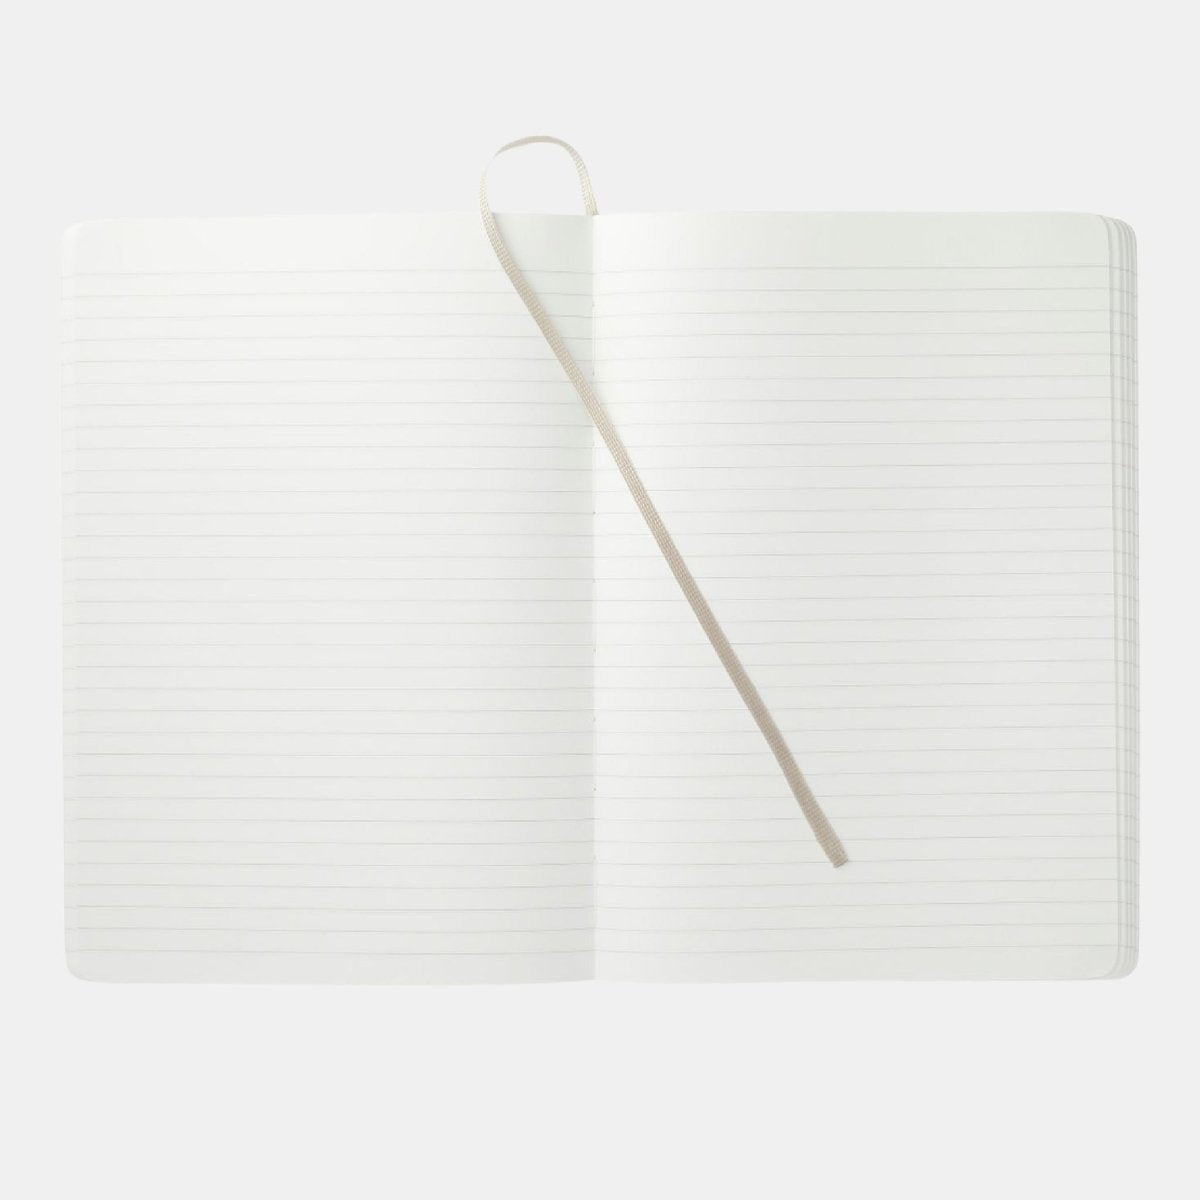 Karst Stone Paper Softcover Notebook